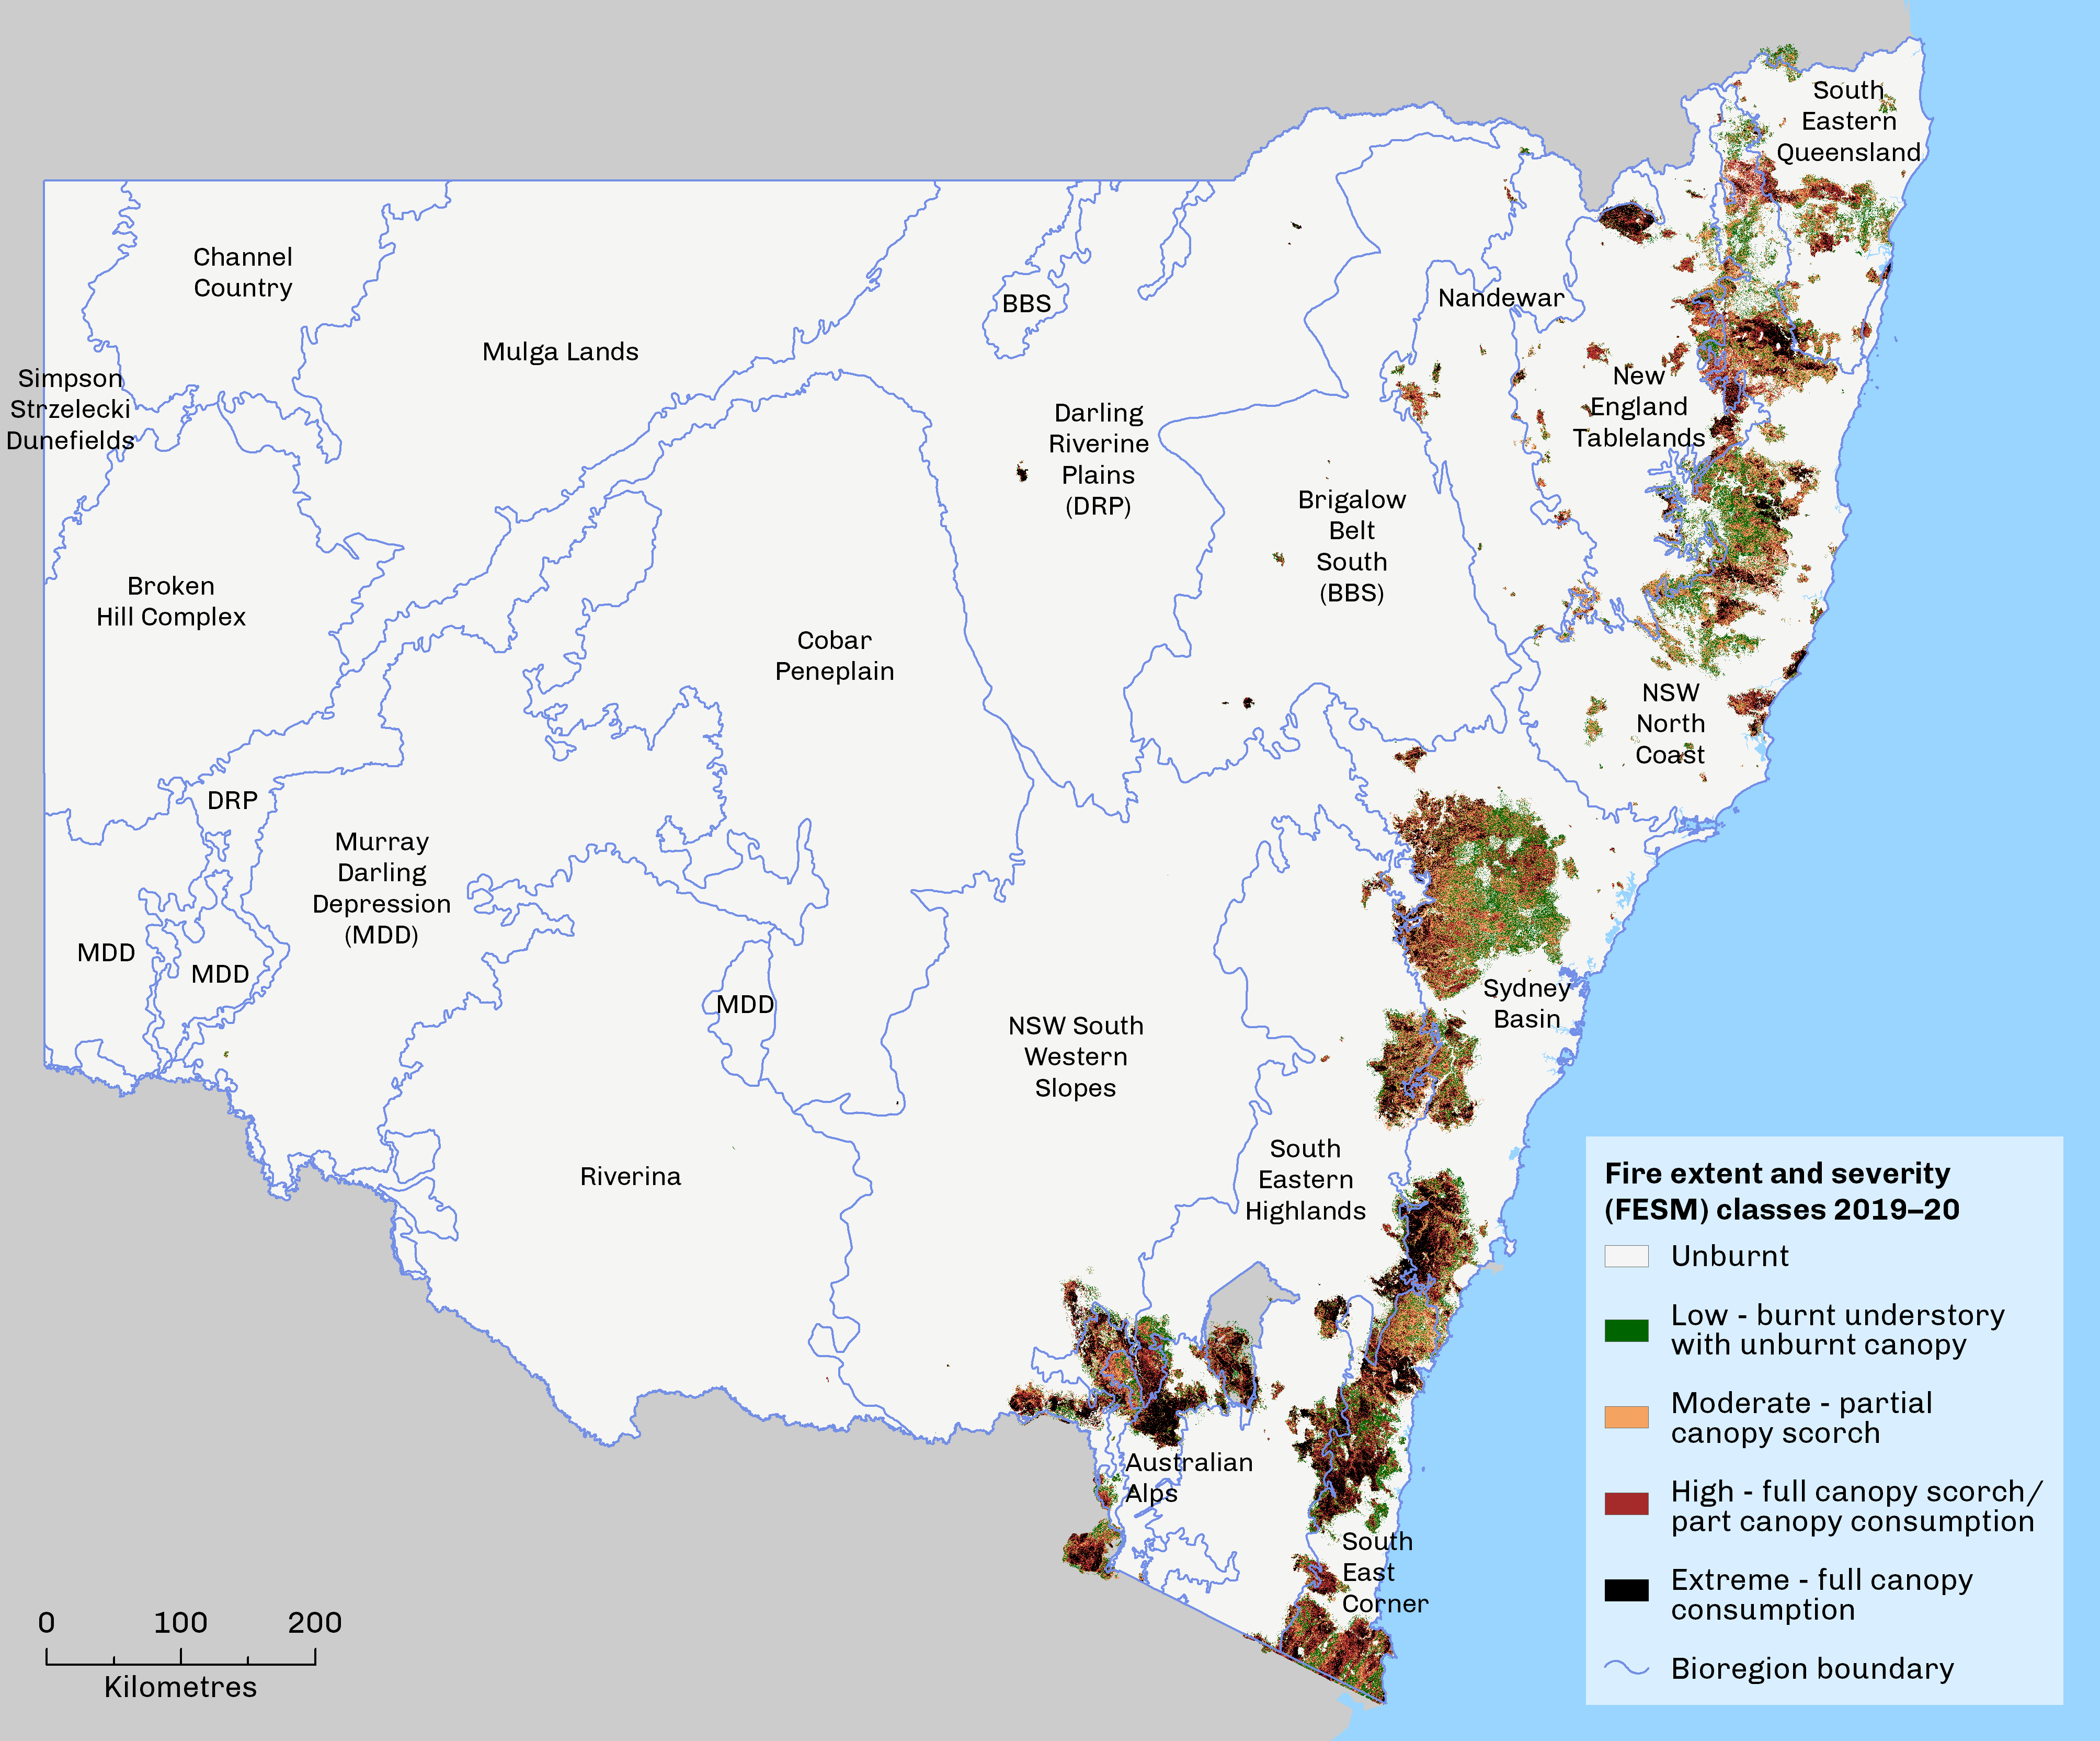 map that shows the extent and severity of the fires in NSW in the 2019–20 fire season